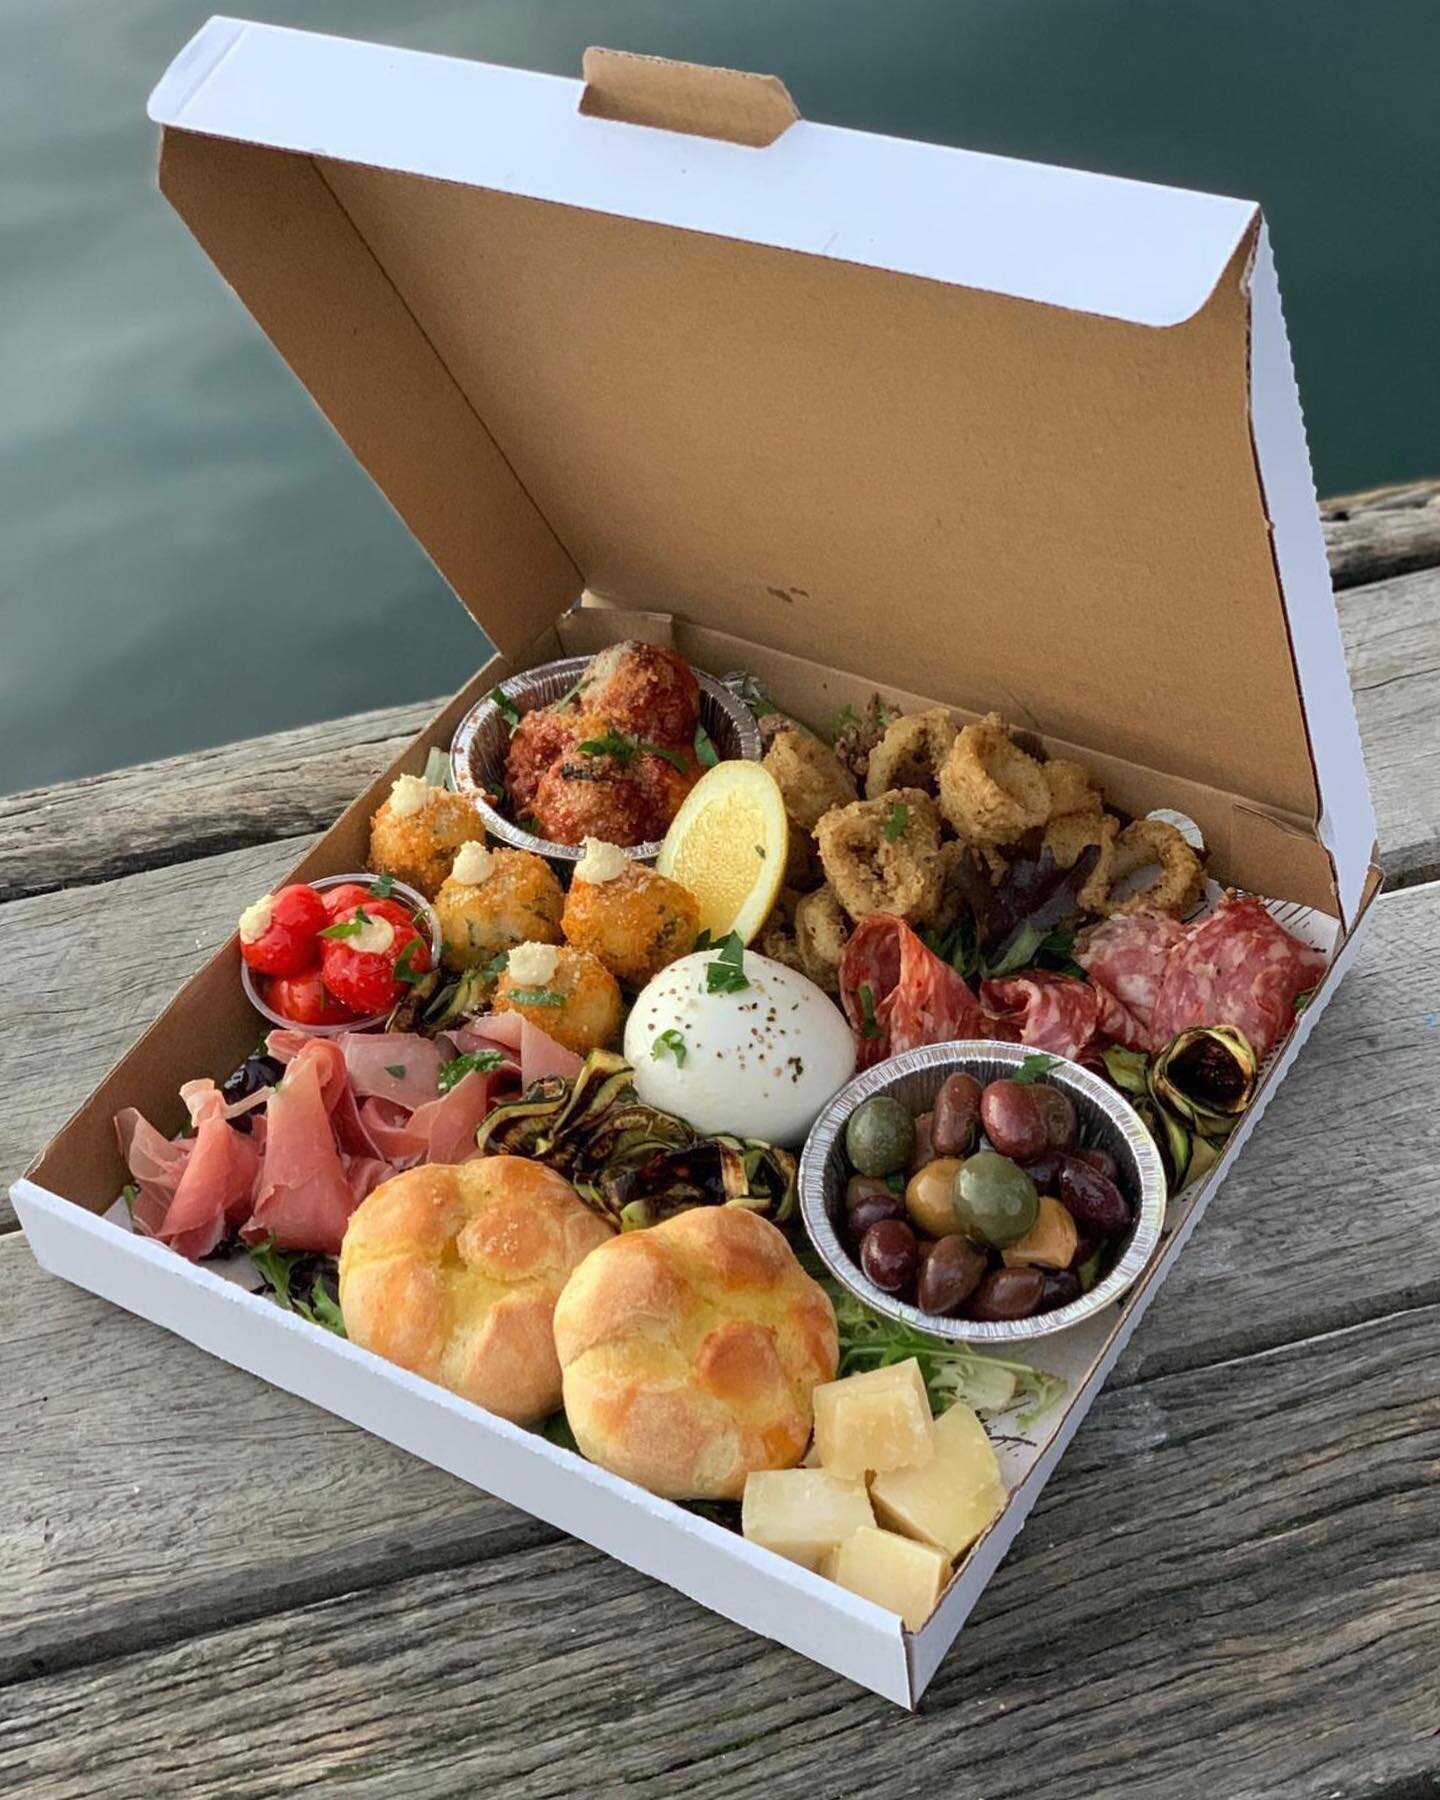 our antipasto takeaway boxes are back! Each comes with a complimentary bottle of wine. Preorders are preferred via emailing: functions@waterfrontstore.com.au to have one, or several made up fresh on the spot. So much YUM! in one small box #waterfront